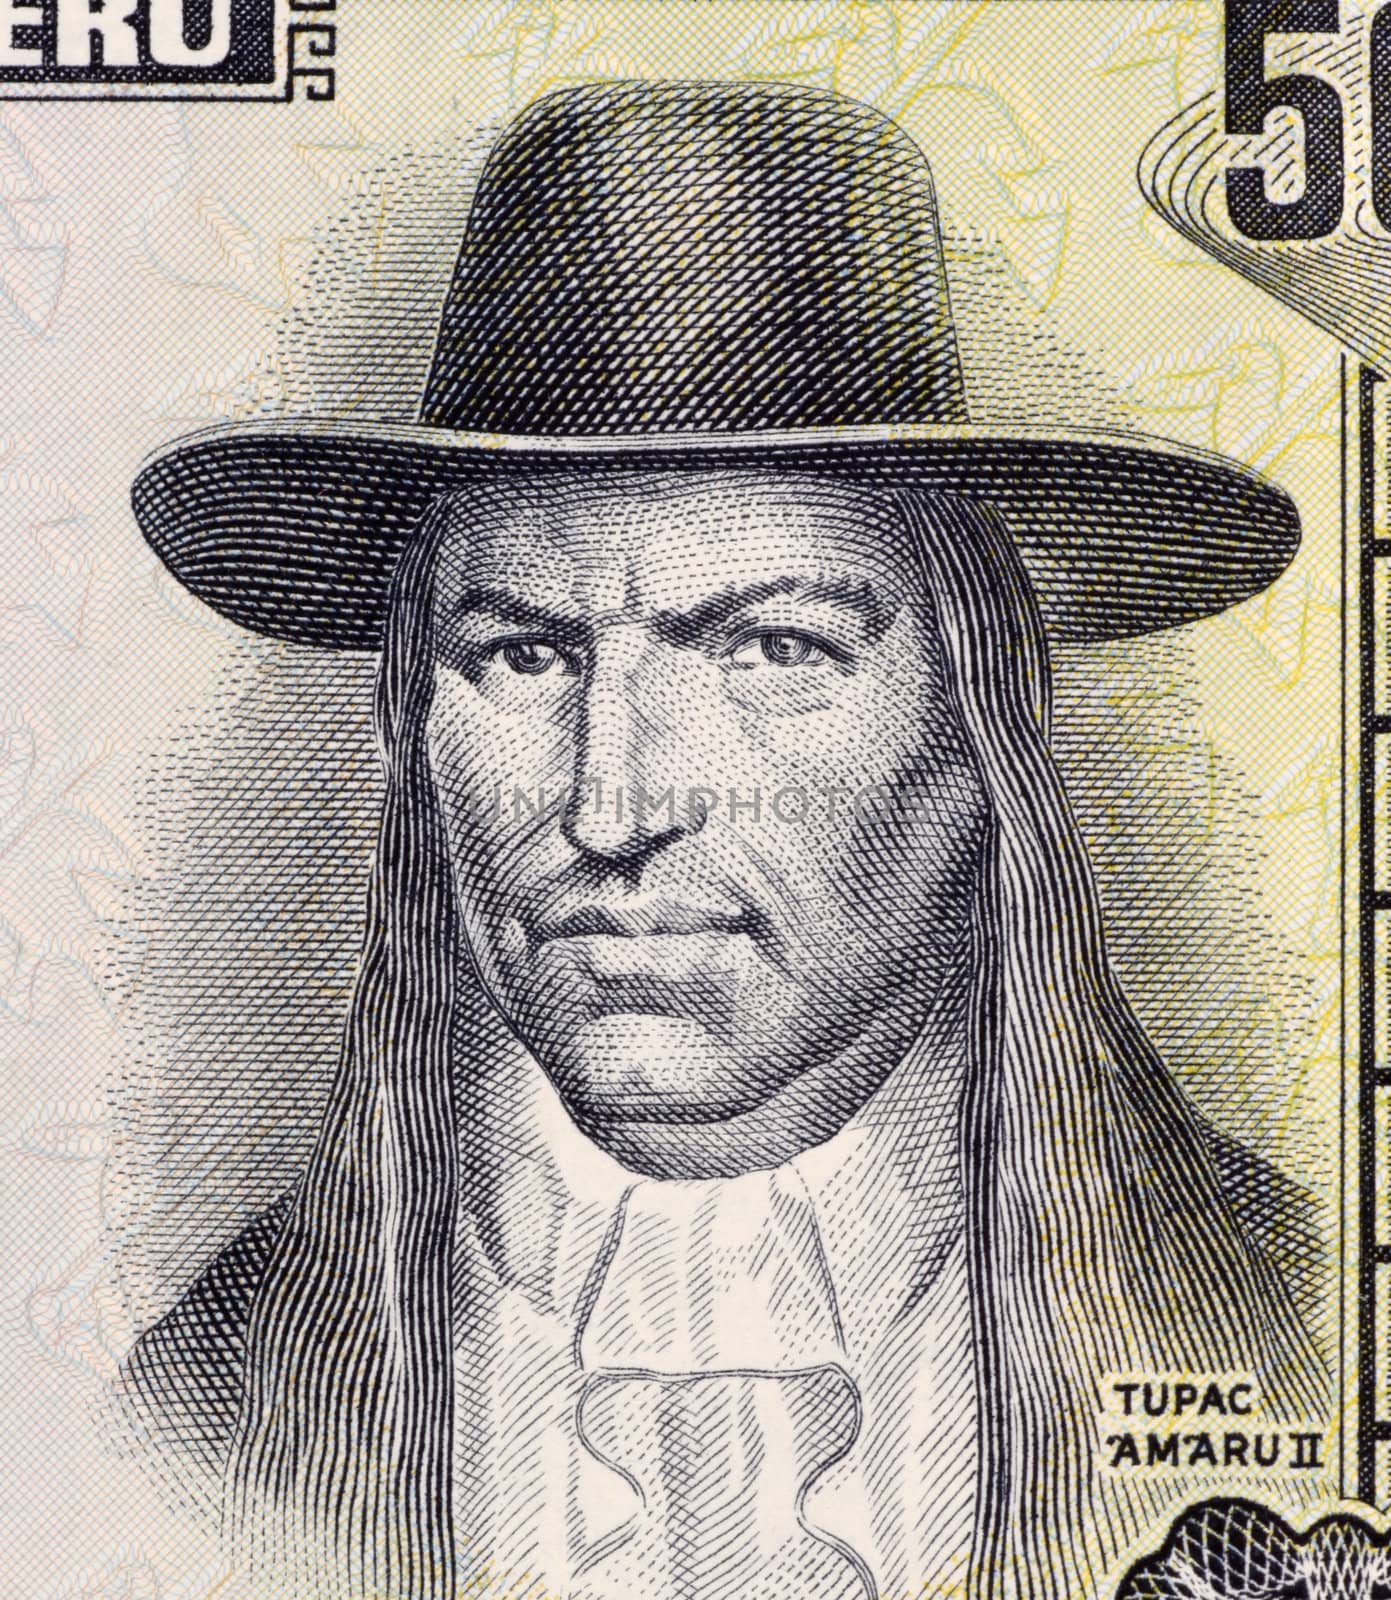 Tupac Amaru II on 50 Soles de Oro 1977 Banknote from Peru. Leader of the indigenous uprising in 1780 against the Spanish occupation.